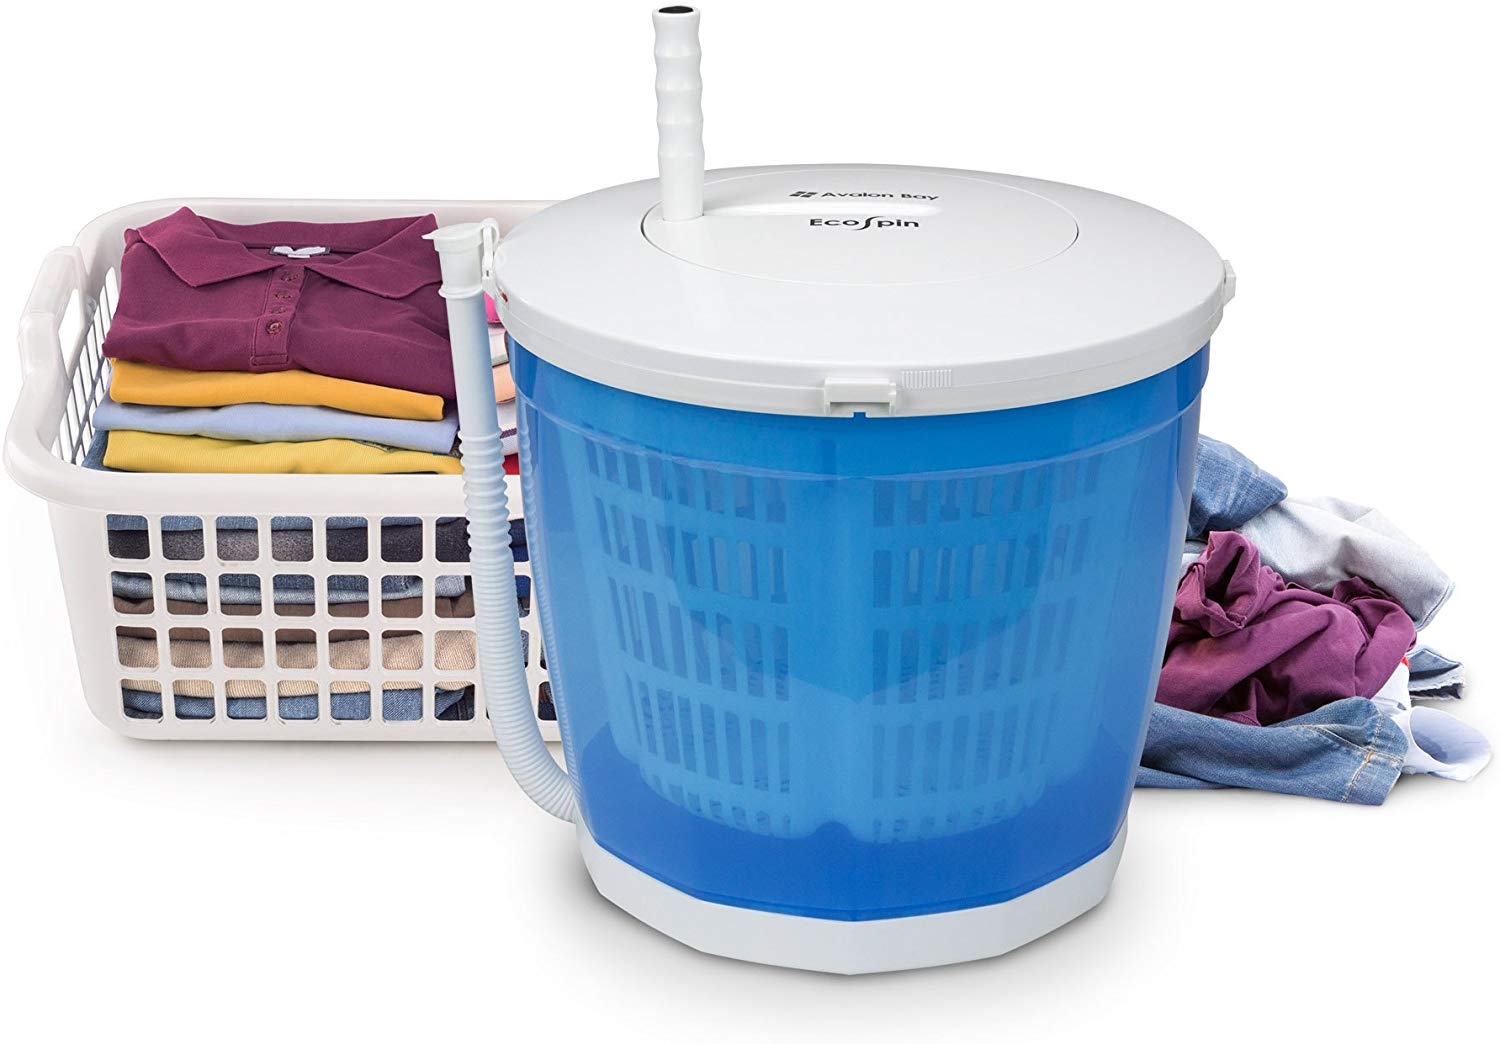 avalon bay ecospin portable spin dryer image